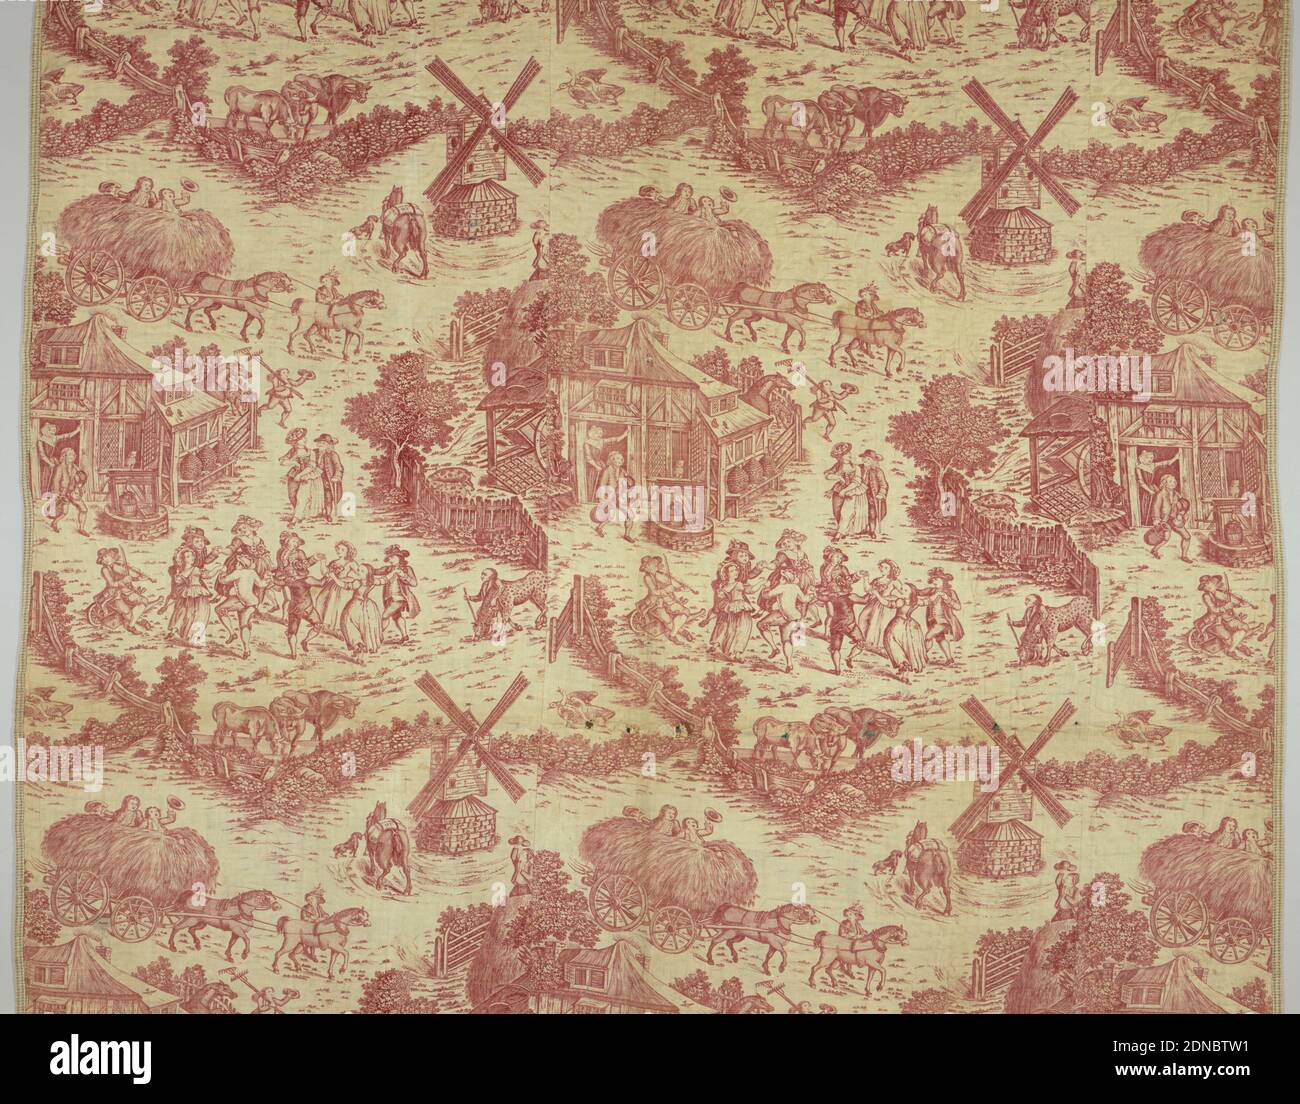 Quilt, Medium: cotton Technique: printed by engraved plate on plain weave, Complete quilt of copperplate printed cotton, with a design in red on a white ground. The design shows men and women dancing in the yard outside a cottage, a windmill, and boys riding in a hay wagon. A horse is bearing sacks on its back with the initials 'WC'. The quilt is lined with polychrome printed cottons in patchwork., England or USA, 18th century, printed, dyed & painted textiles, Quilt Stock Photo